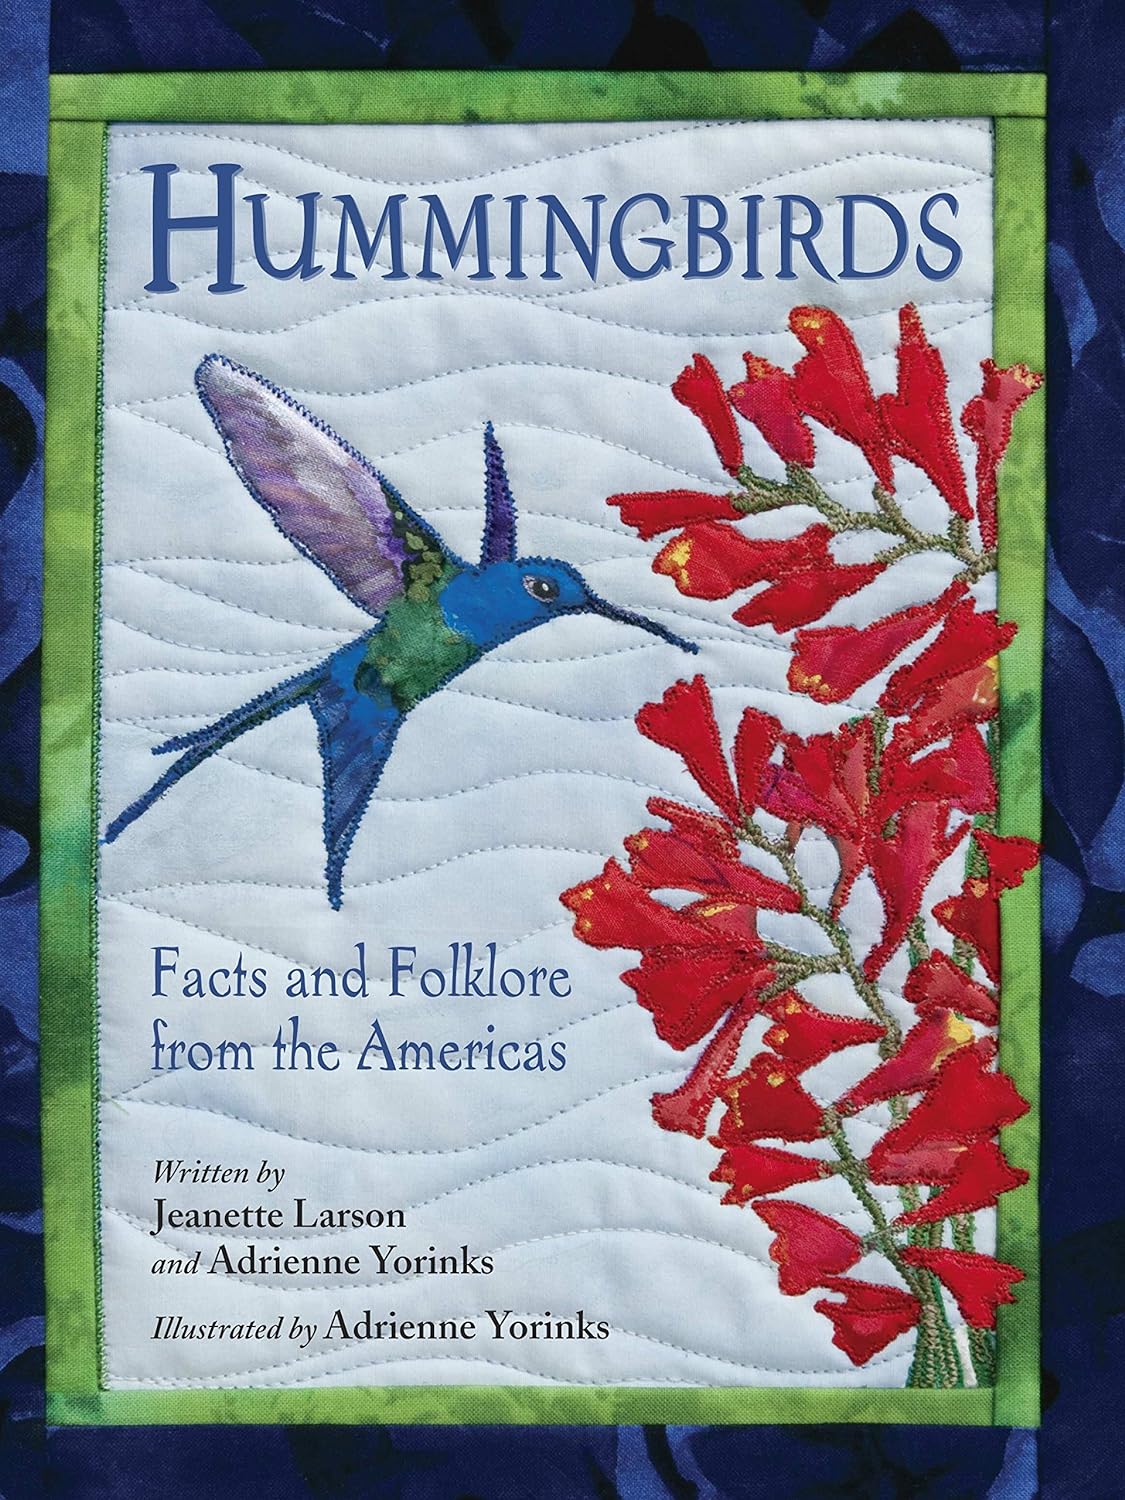 books about hummingbirds9